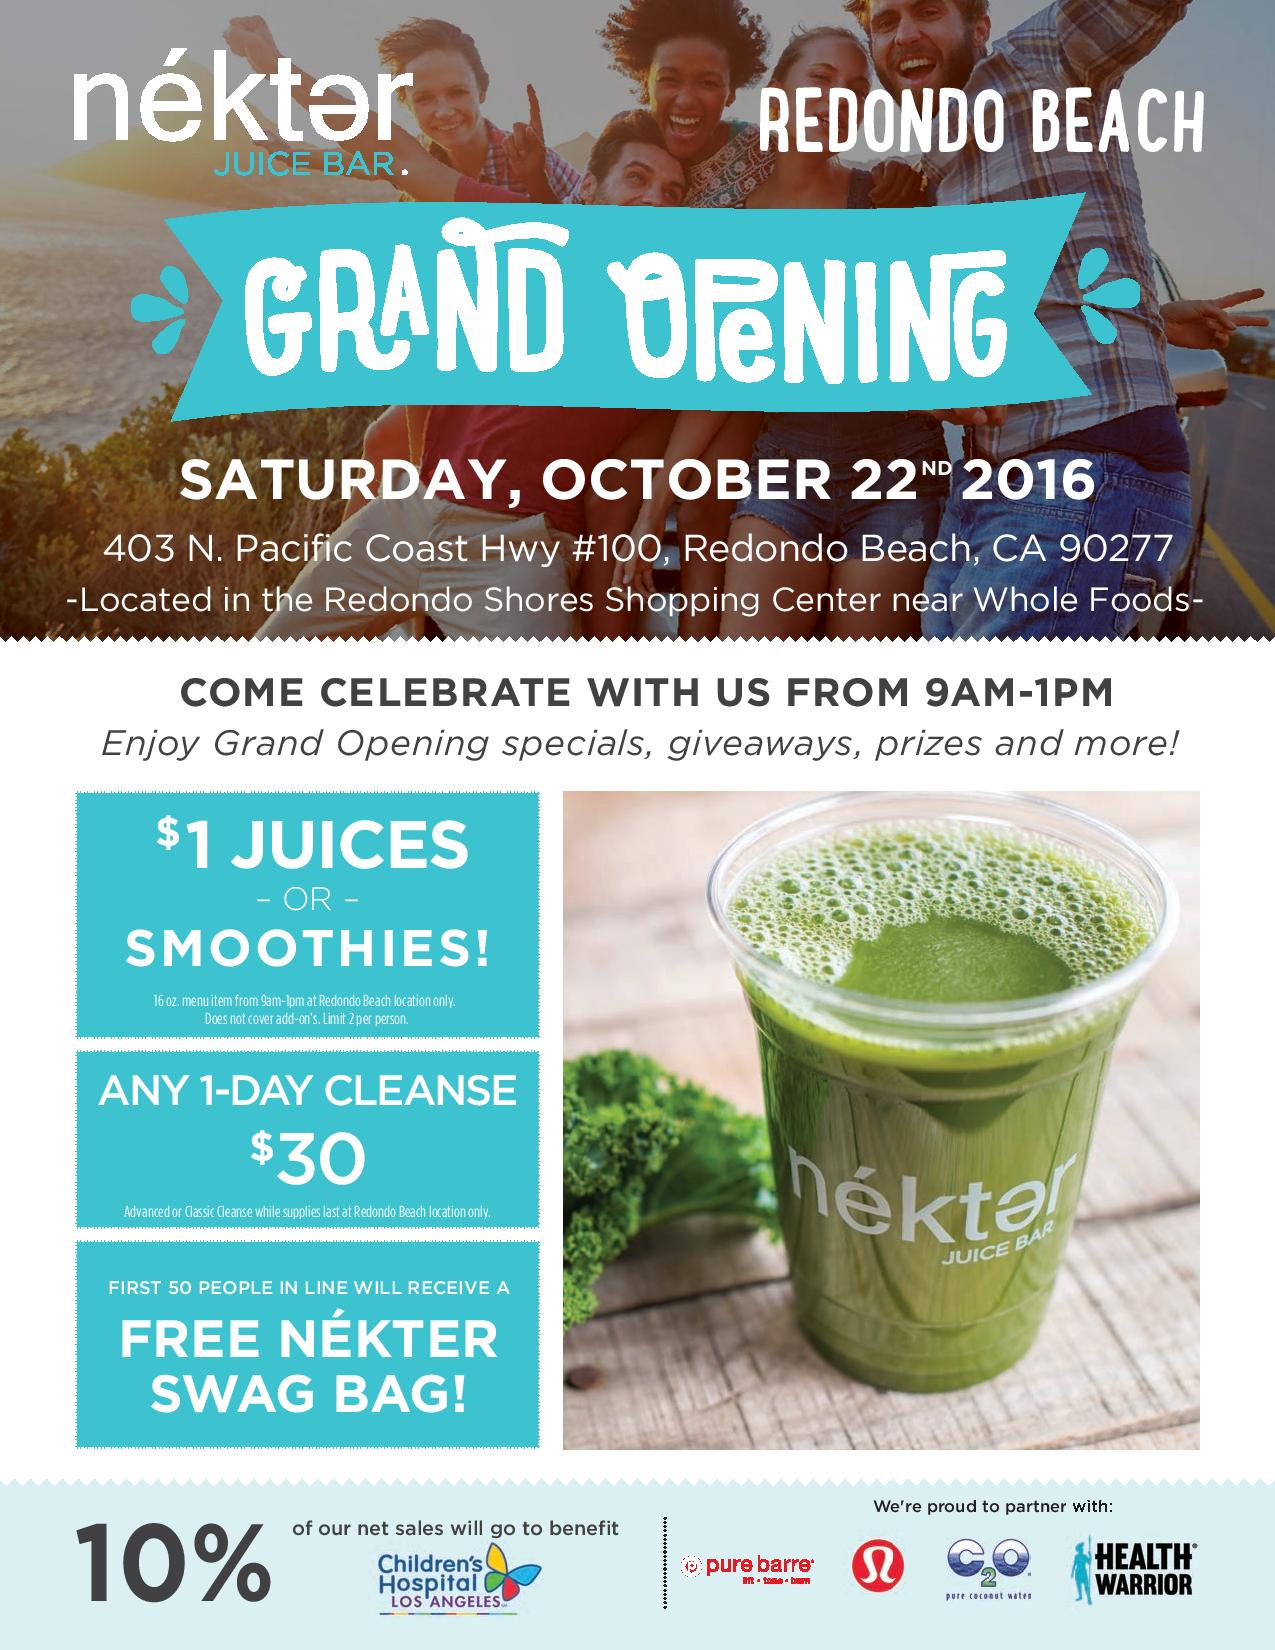 Nekter Juice Bar Redondo Beach Grand Opening, $1 Juices and Smoothies!